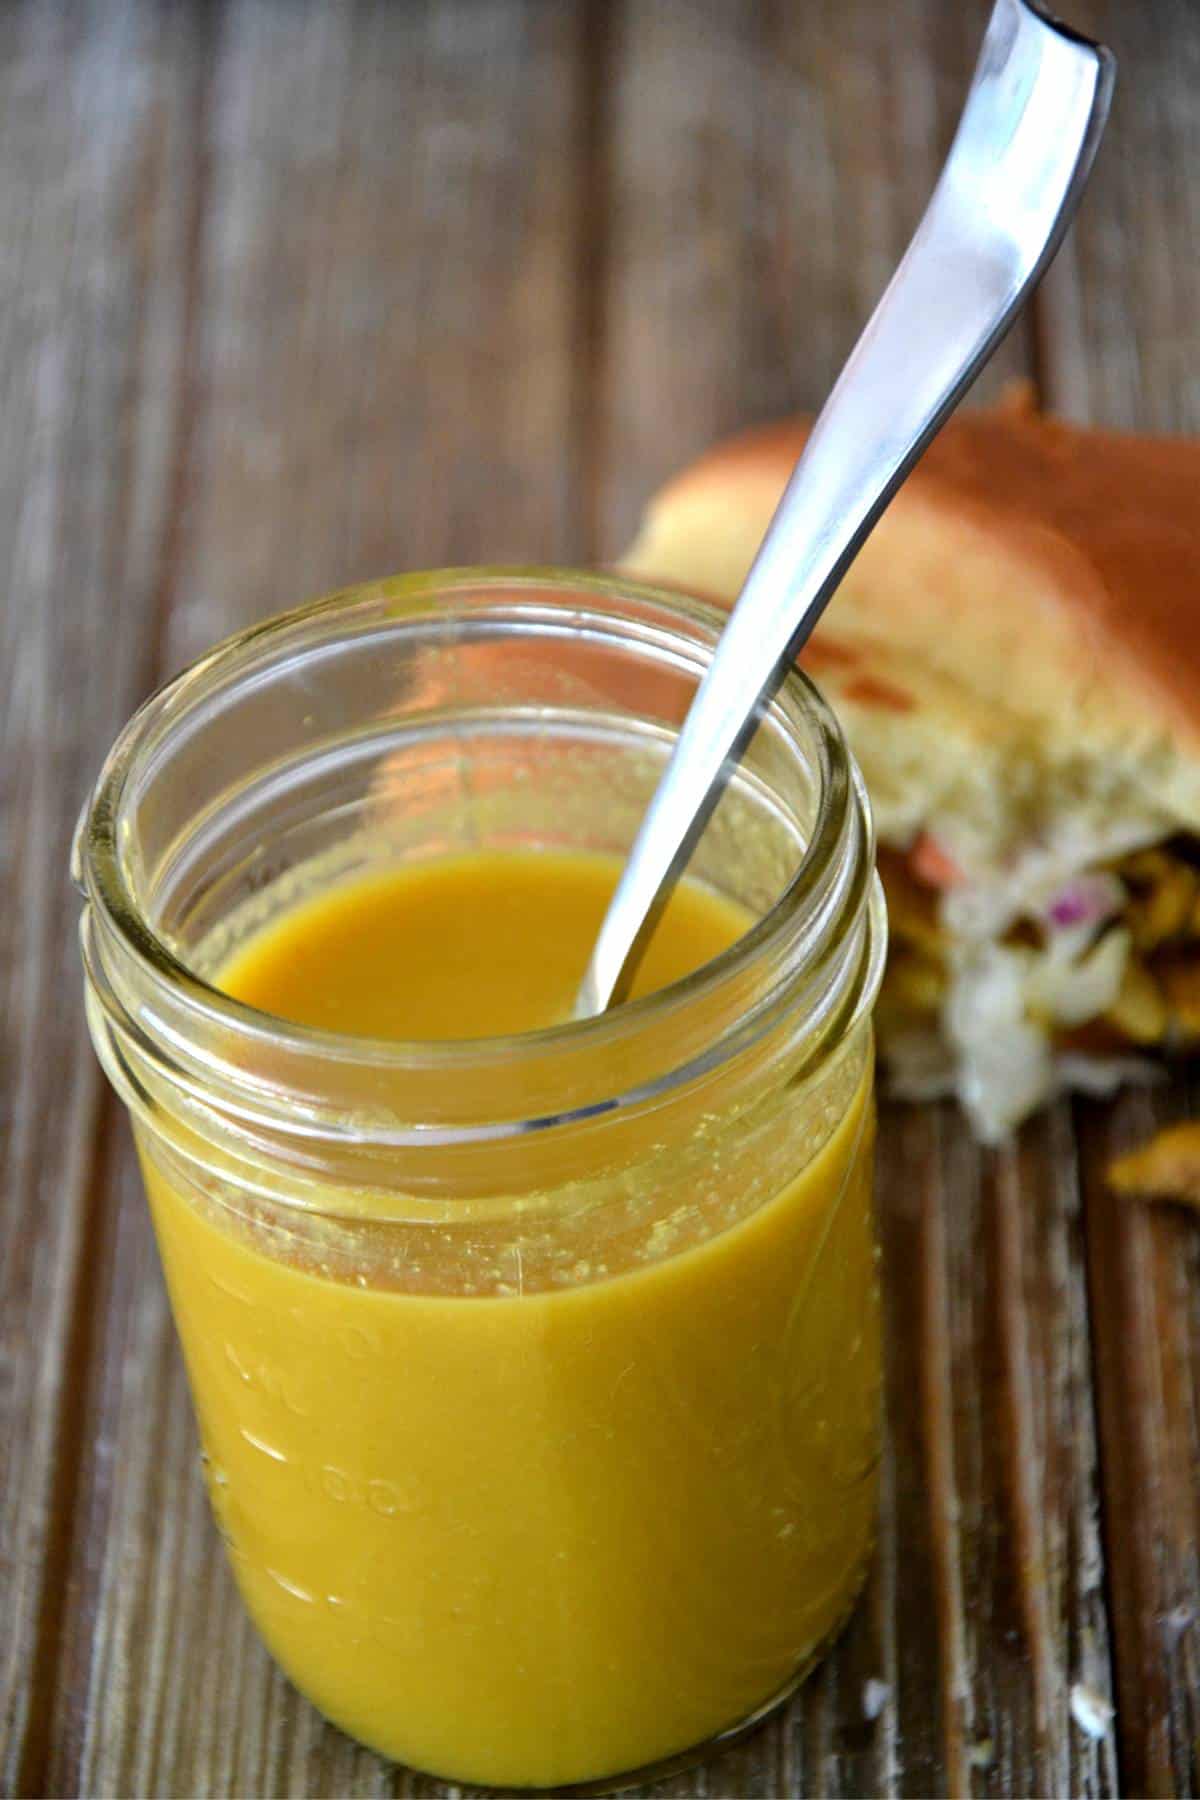 mustard sauce with spoon and sandwich in background.